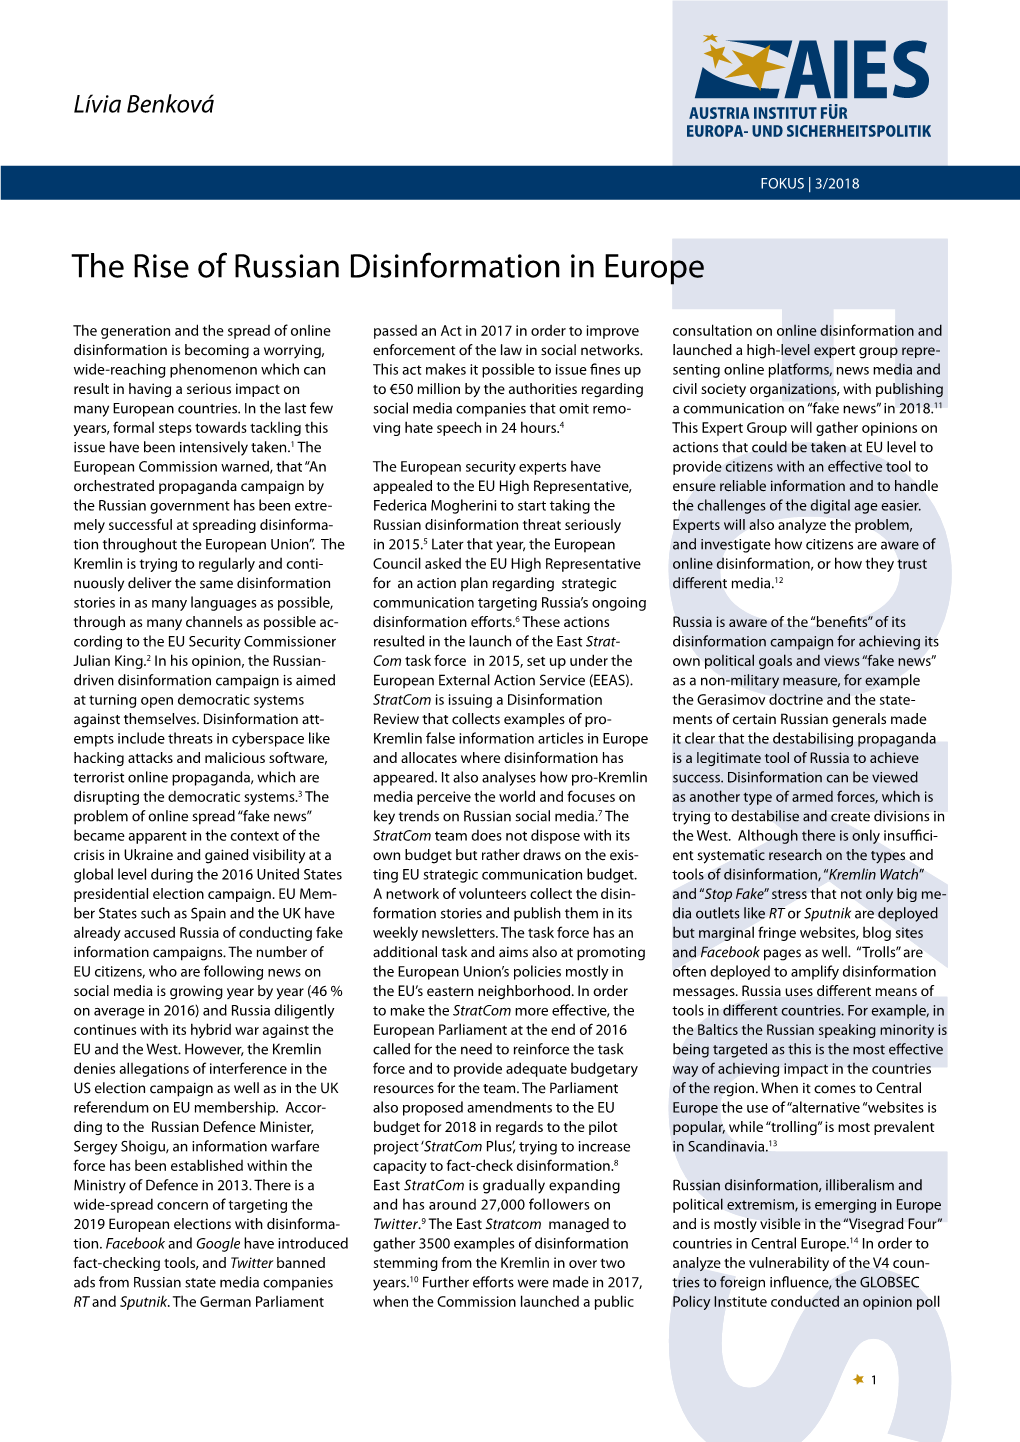 The Rise of Russian Disinformation in Europe